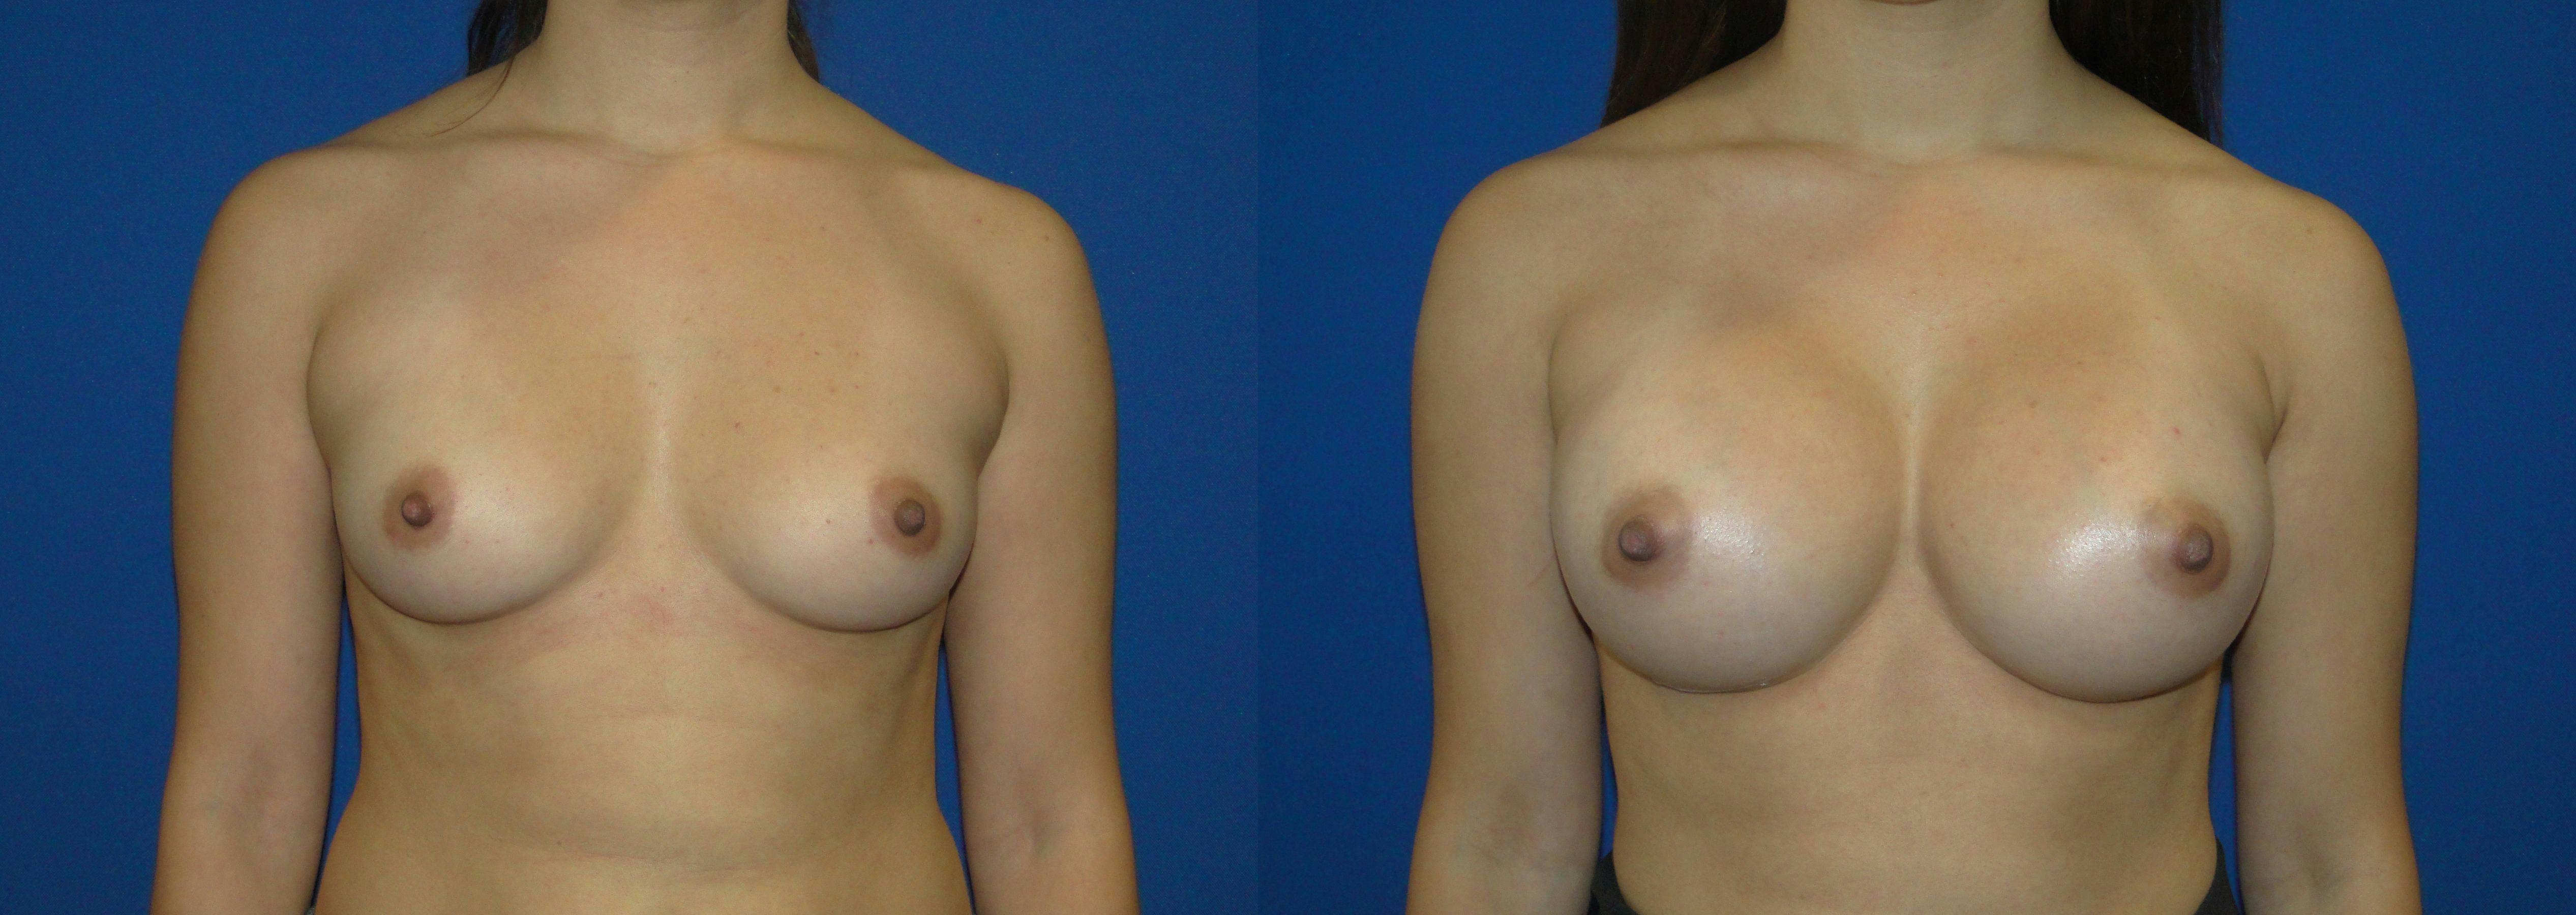 Before And After Breast Augmentation in Orange County - 03